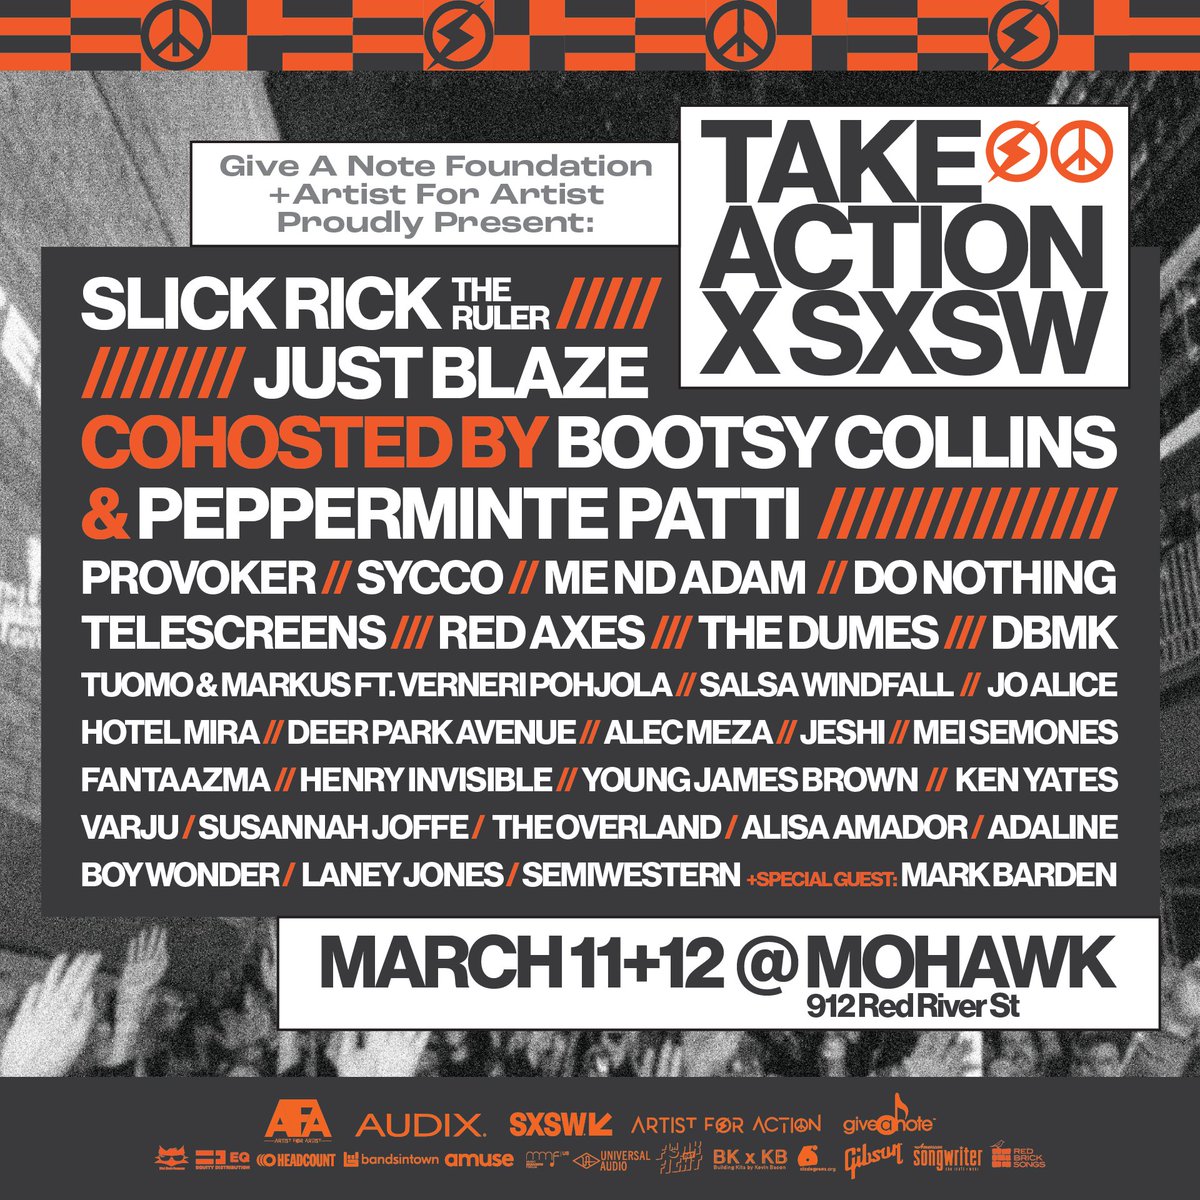 Get ready for SXSW! AUDIX will be live on stage at @sxsw, front and center with 30+ artists and 35+ panelists for TAKE ACTION x SXSW @mohawkaustin @giveanote @afamgmt! RSVP: artistforartist.com/sxsw #sxsw #takeactionsxsw